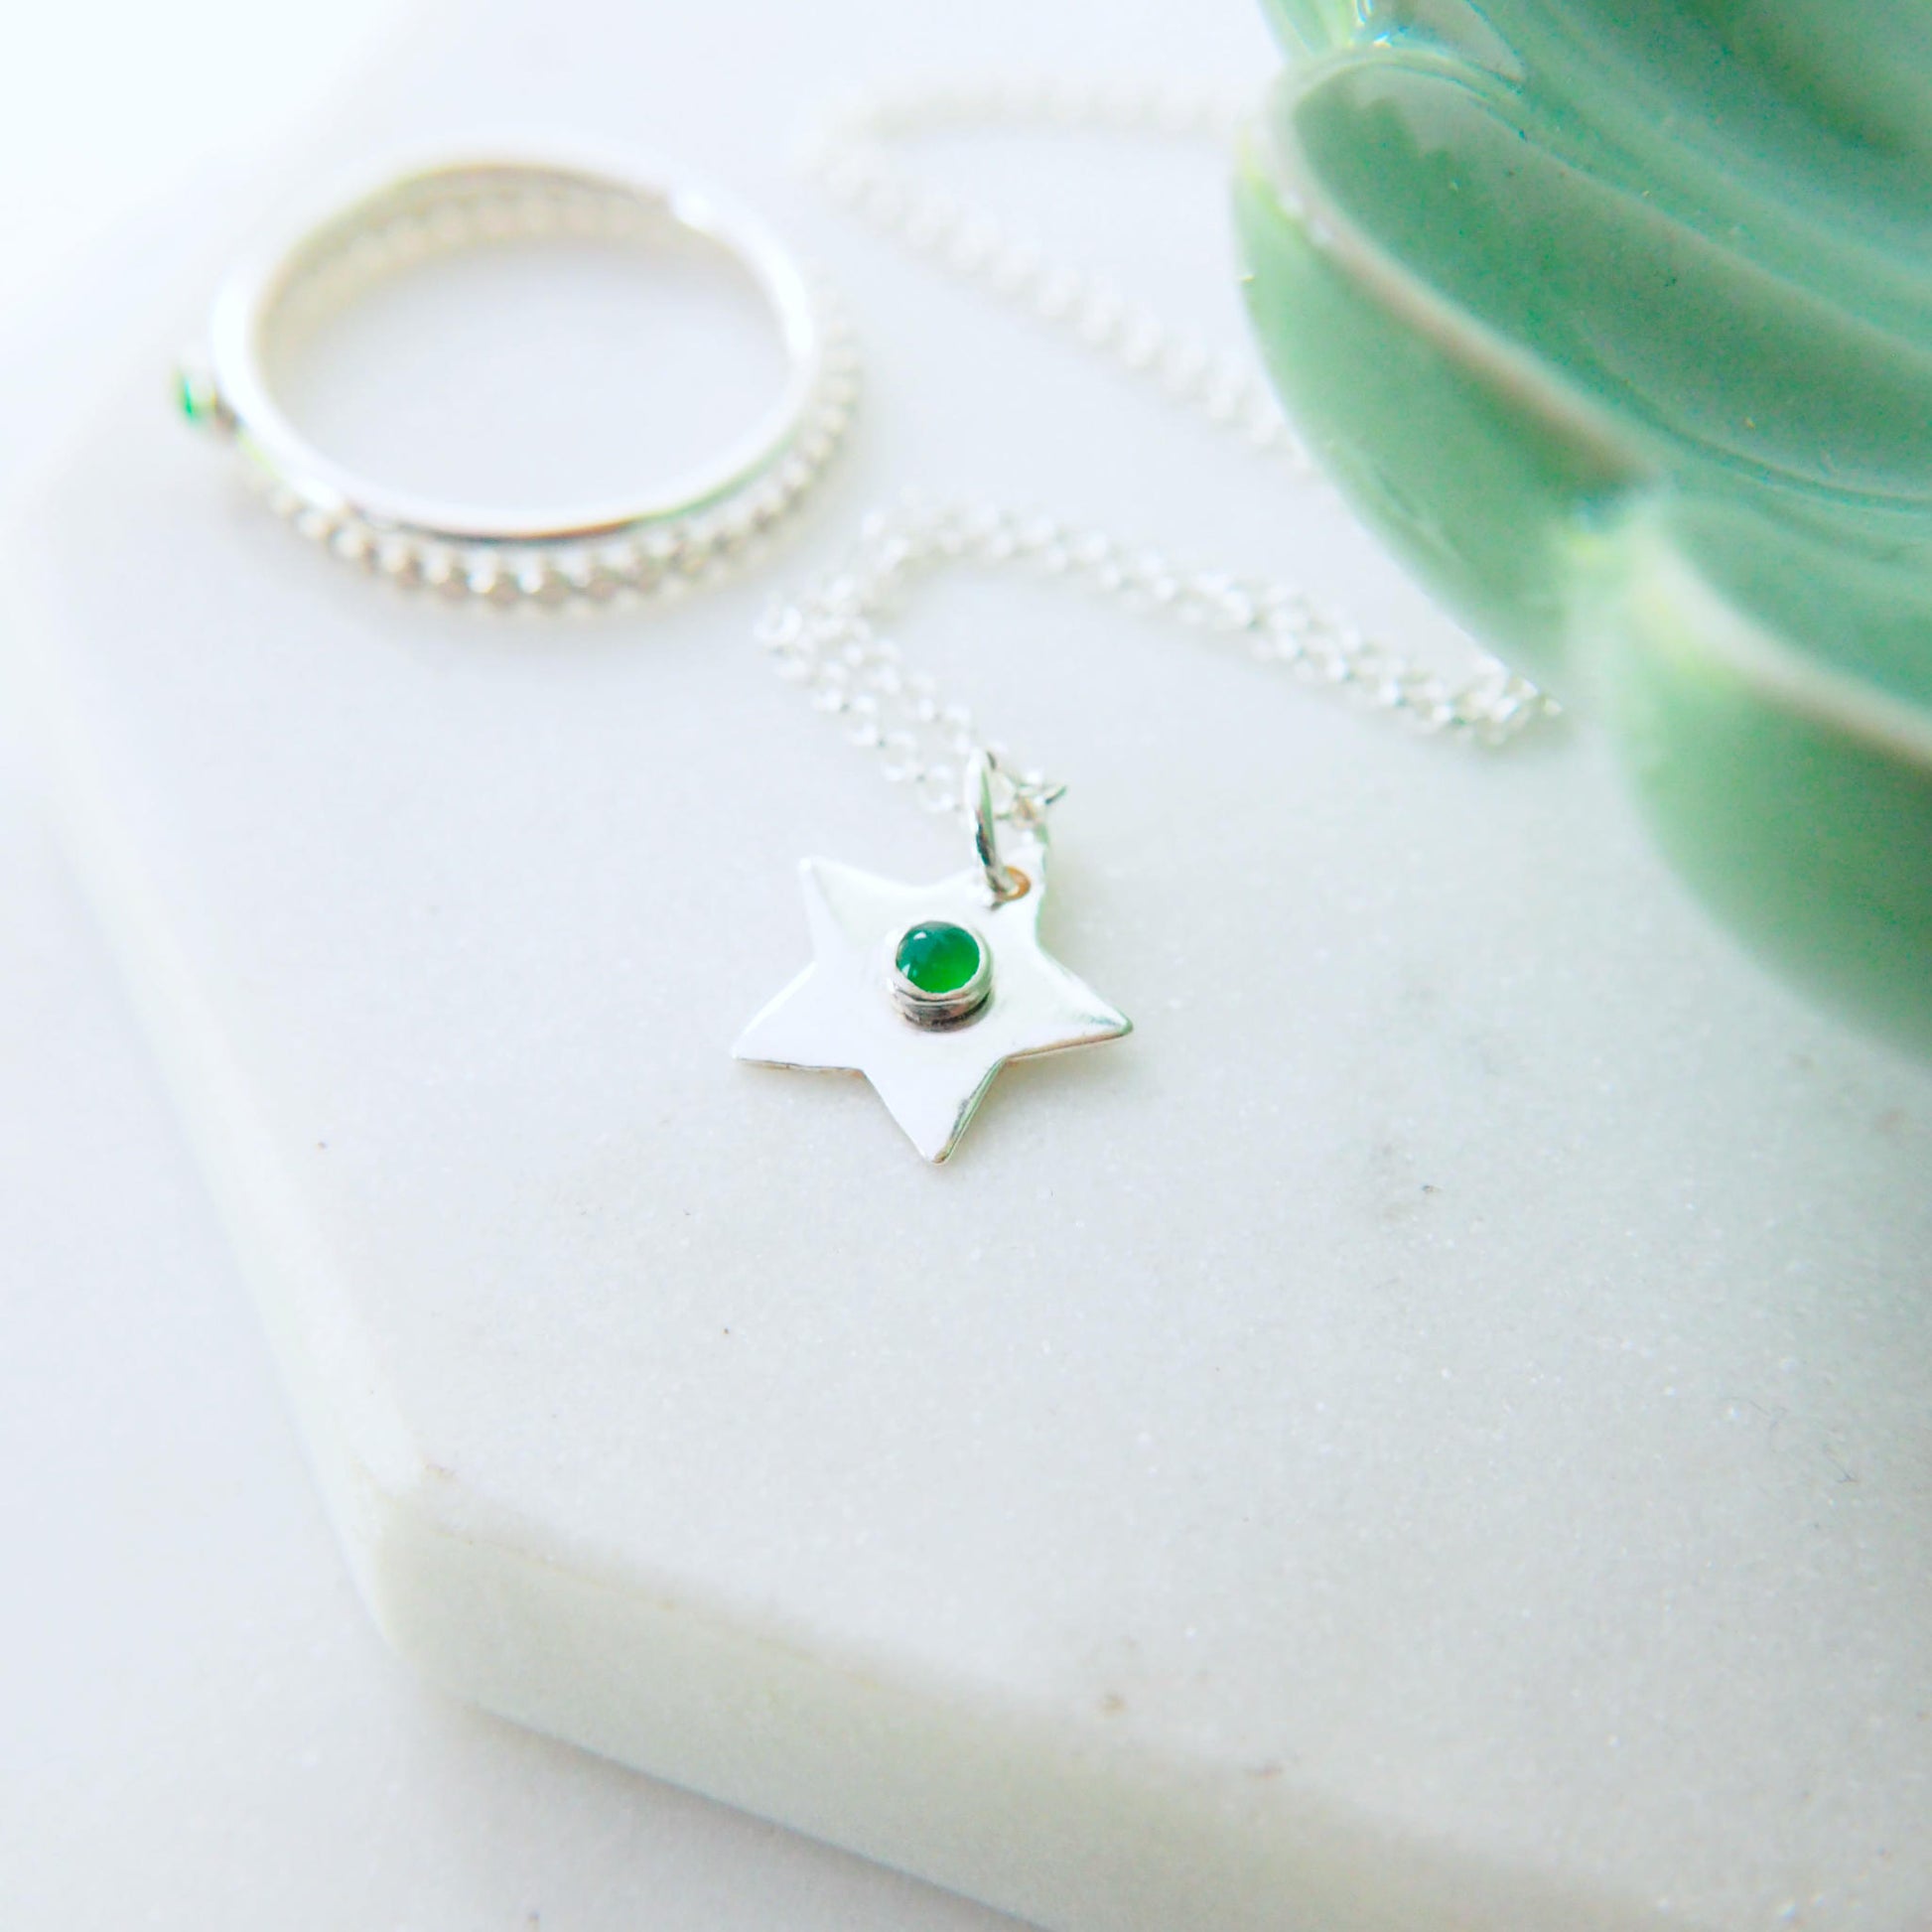 Birthstone Charm Necklace in the shape of a star with a round 3mm green agate cabochon centre. The star measures 12mm in size so is small enough for children as well as adults and is available in a range of other birthstones too. It is Sterling Silver and comes with a choice of chain design and length.The gemstone is Green Agate, Birthstone for May. Handmade in Scotland by Maram Jewellery